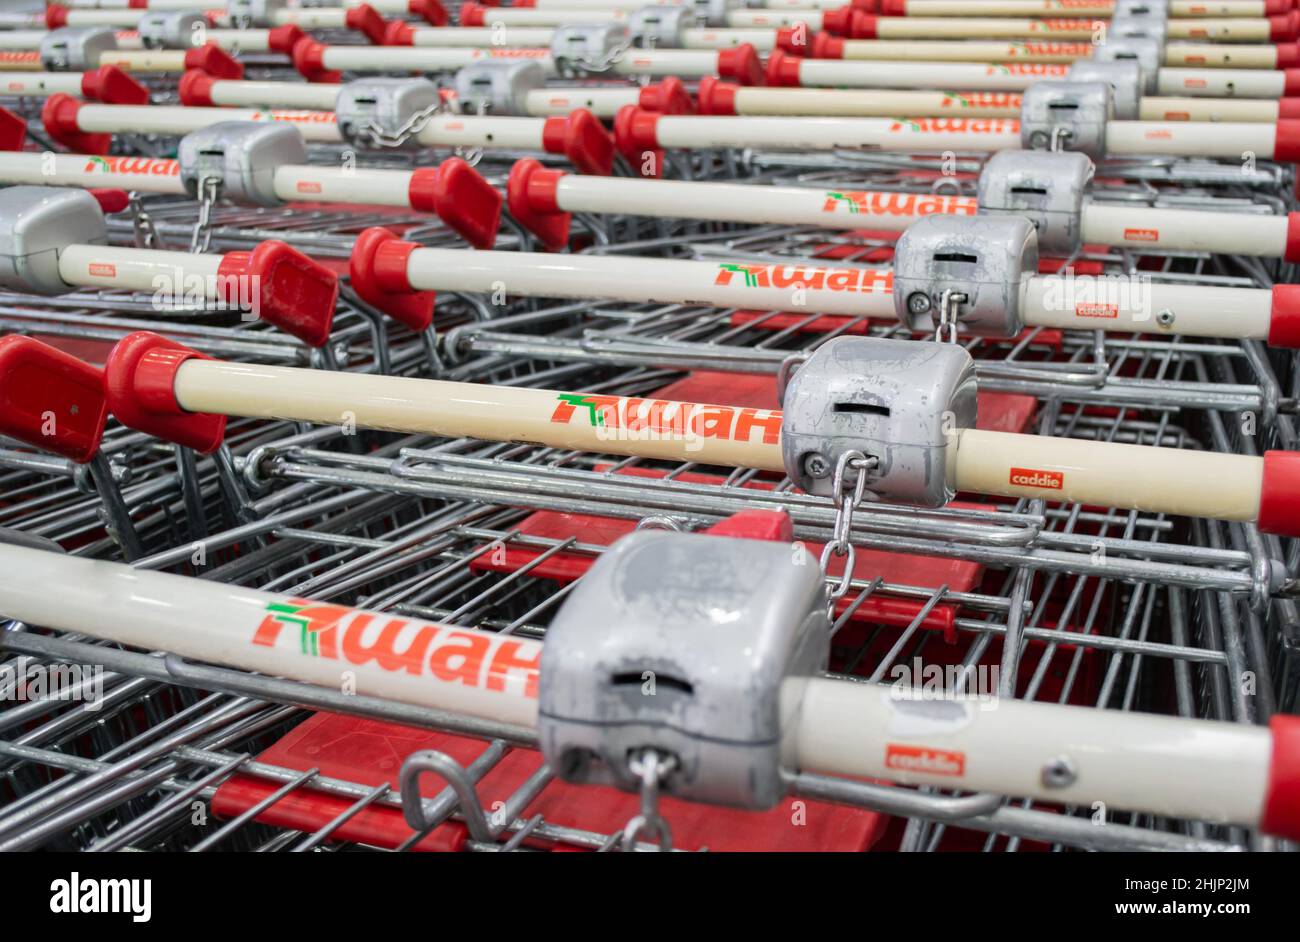 Moscow, Russia, June 2020: Close-up of a coin-operated receiver on the handles of Auchan shopping carts with locks. Stock Photo